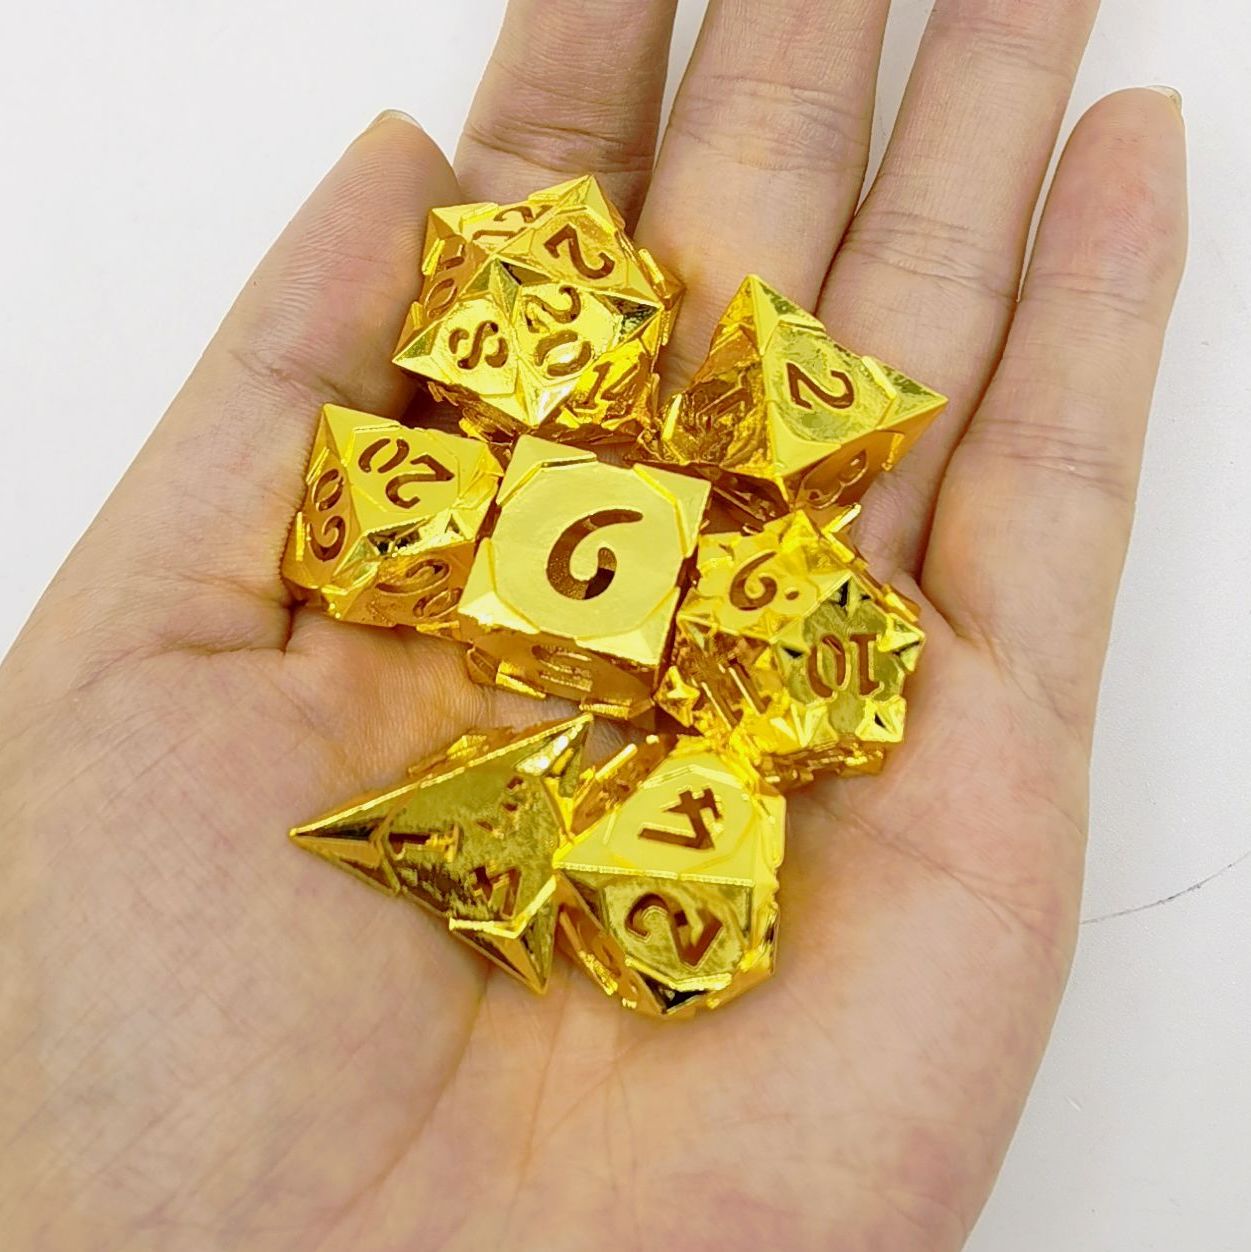 HYMGHO Morning Star Dice hollow out numbers shiny gold